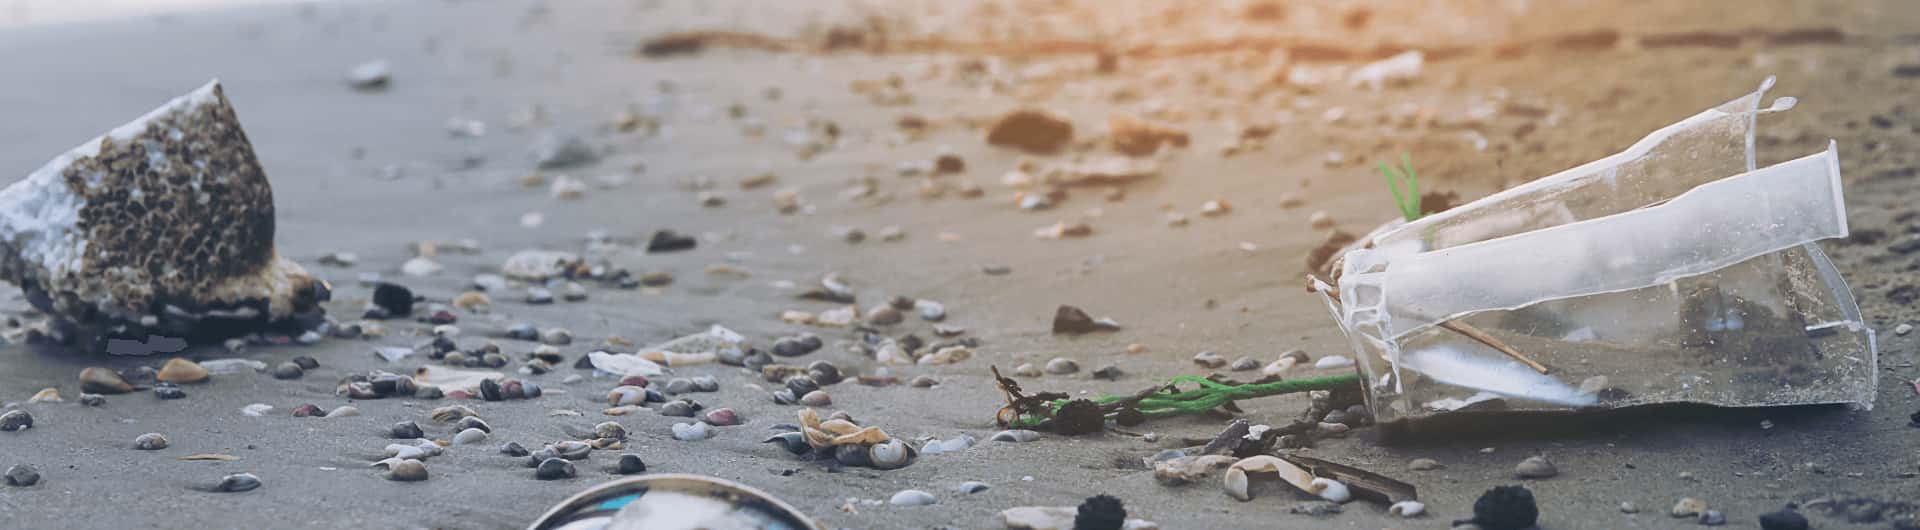 How Plastic Hurts Us, and 3 Ways to Live Without It